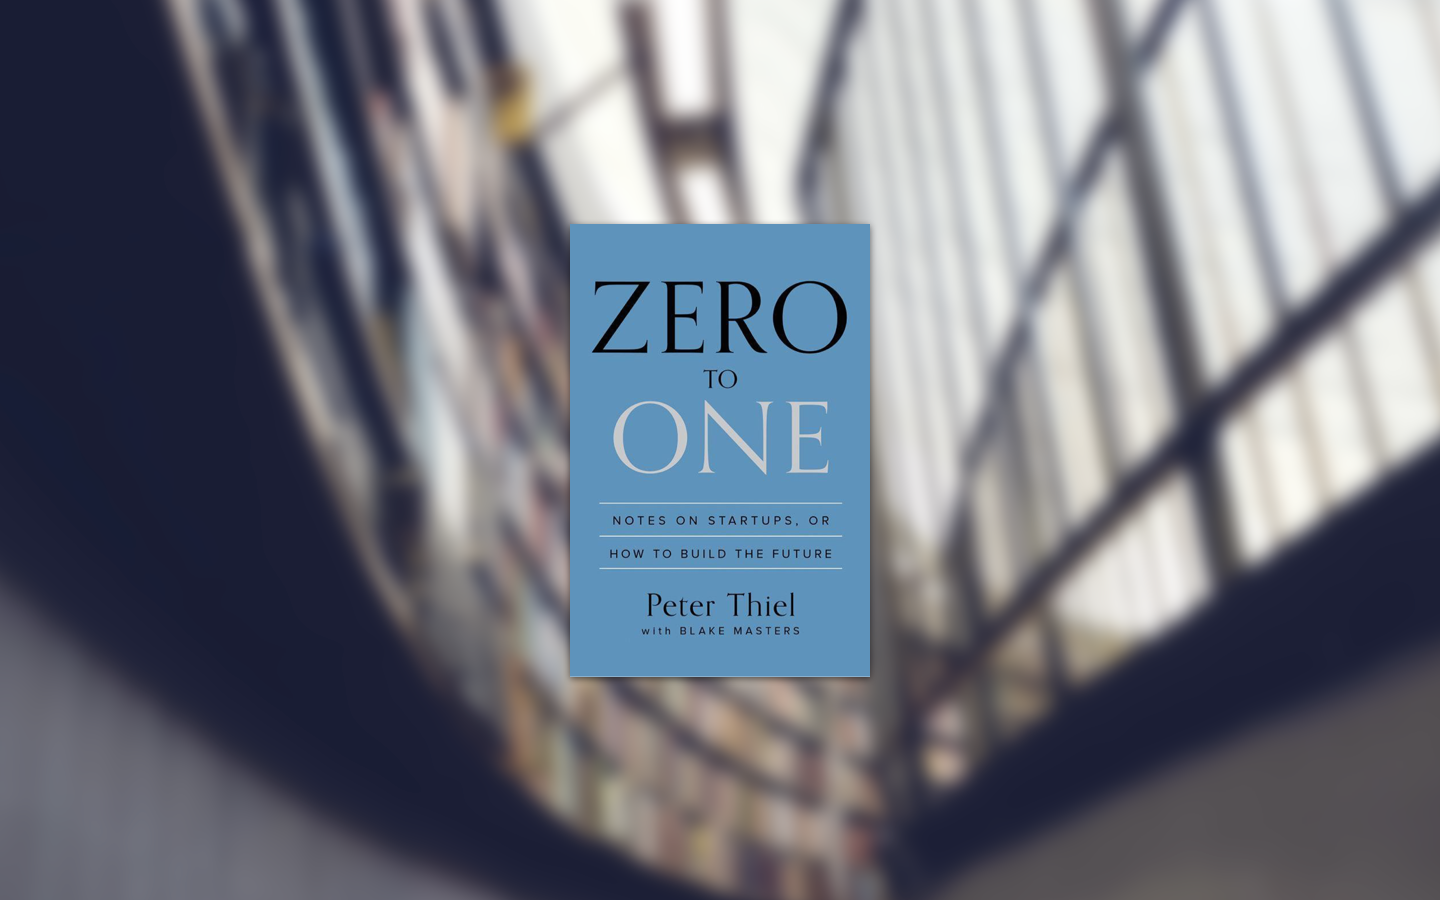 Zero to One download the last version for ios